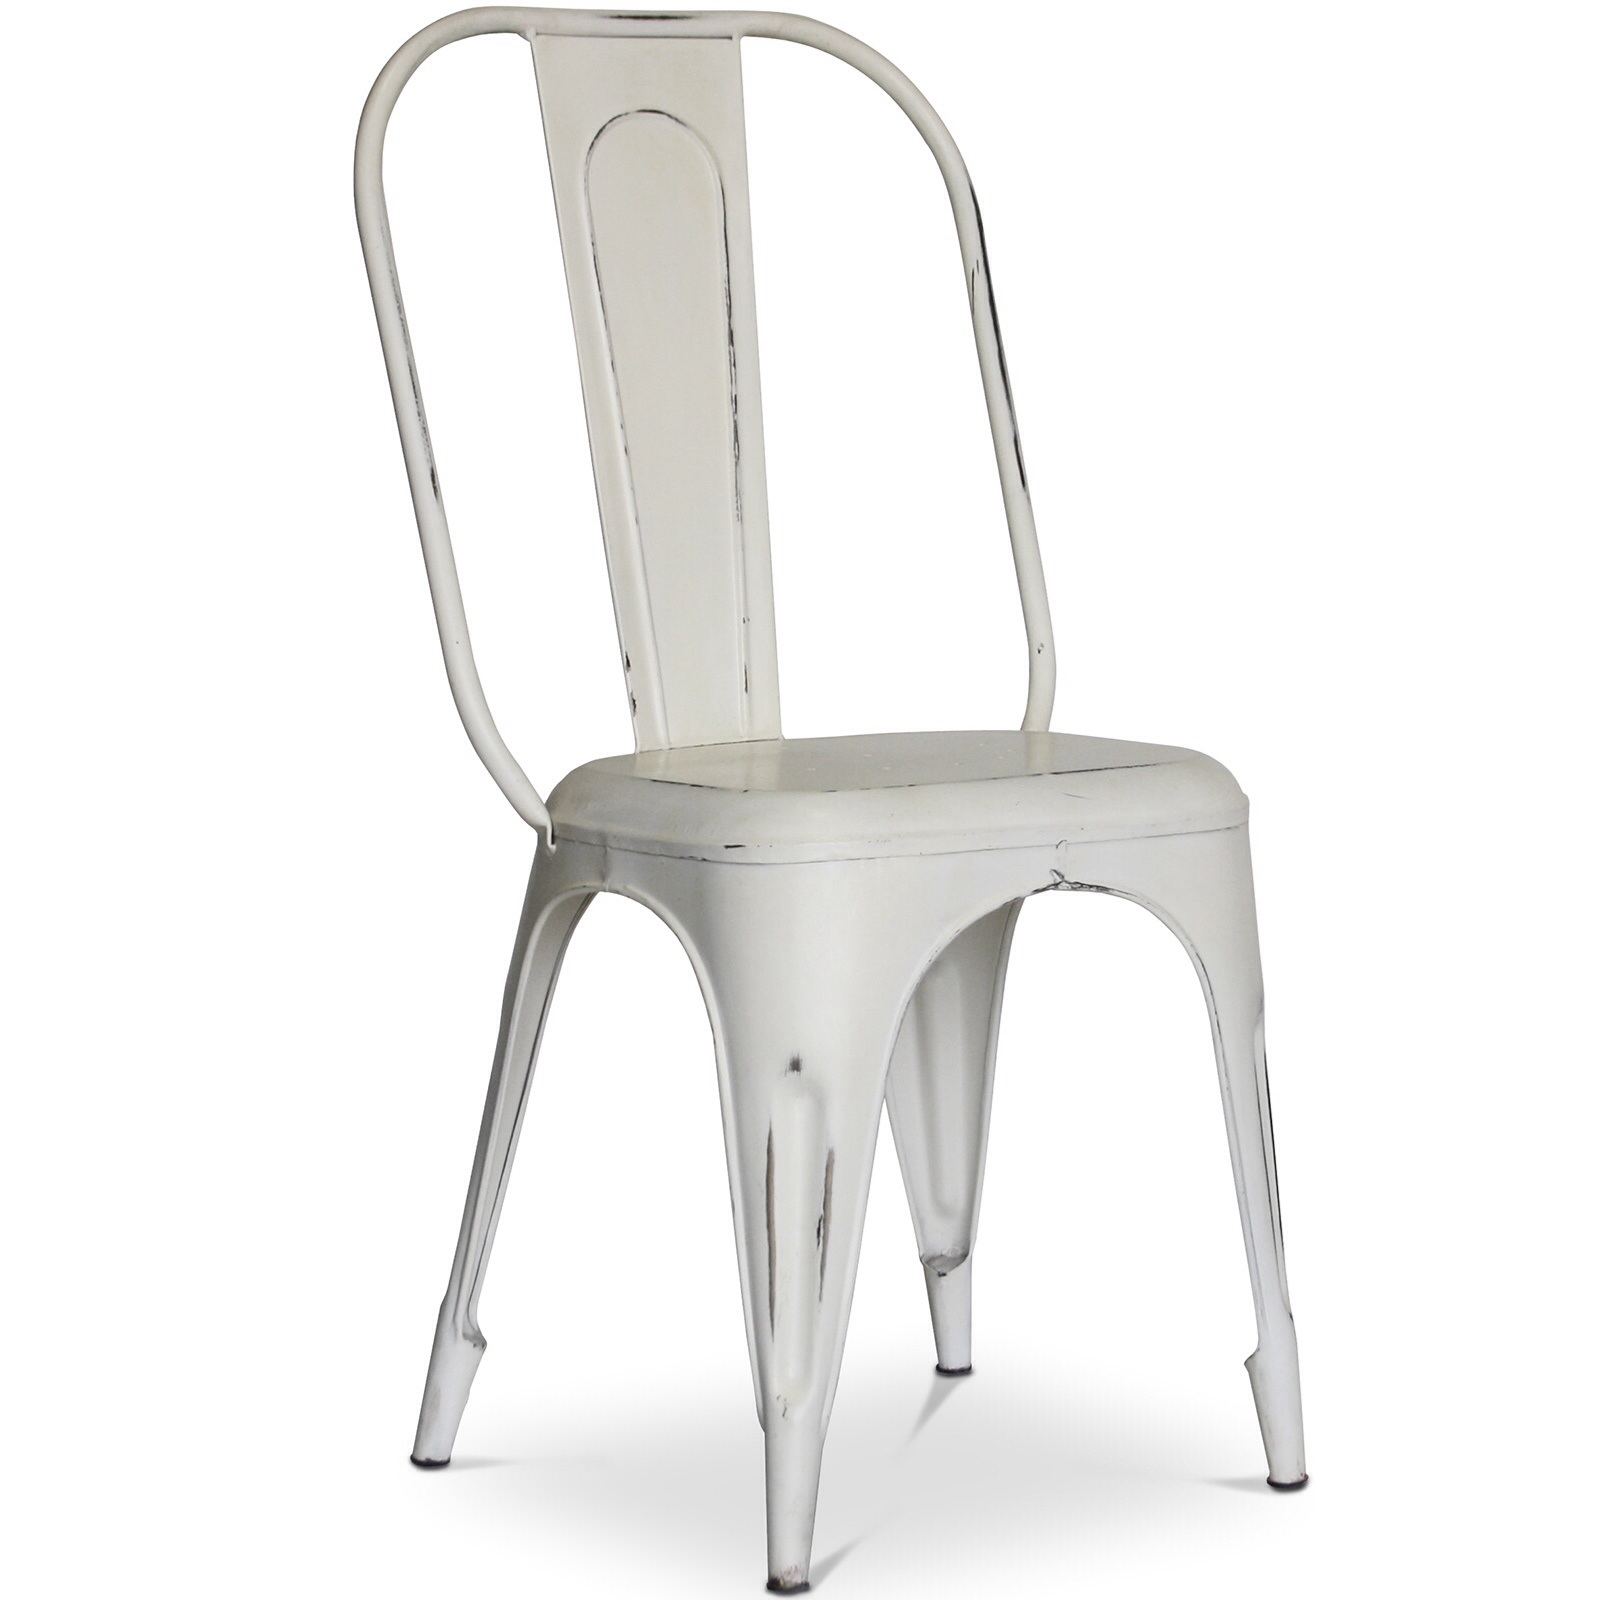 Bistro Retro Chair 450 mm high weathered White